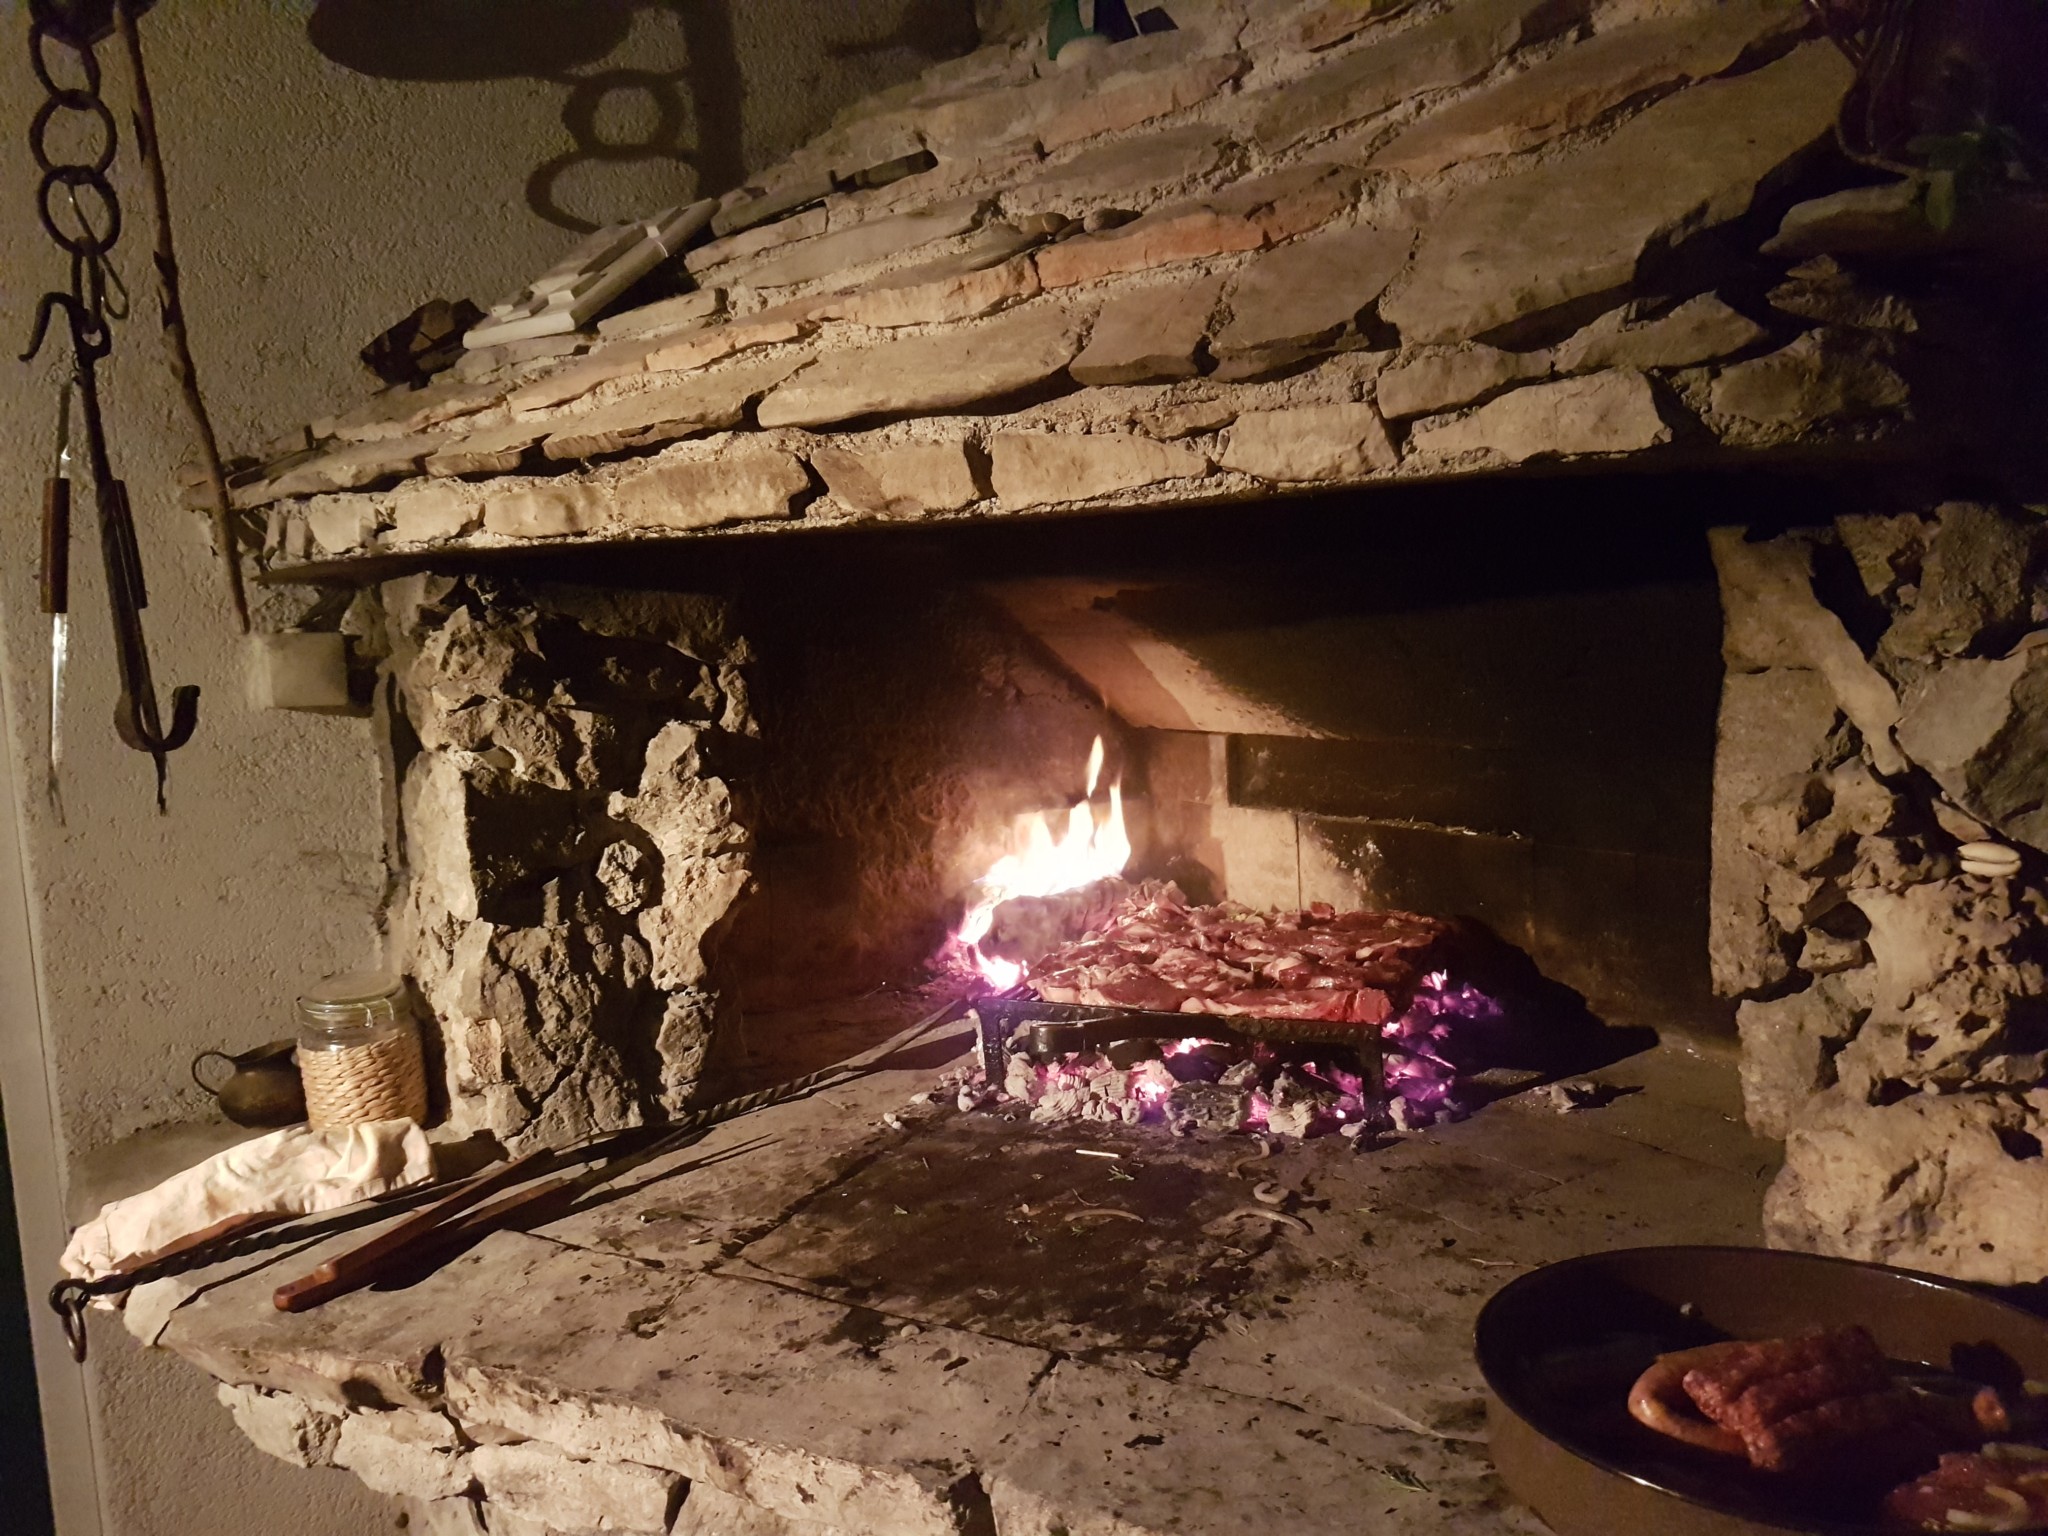 Bruno's Friend's Wood Fire Grill - They Used Pekas to Cook